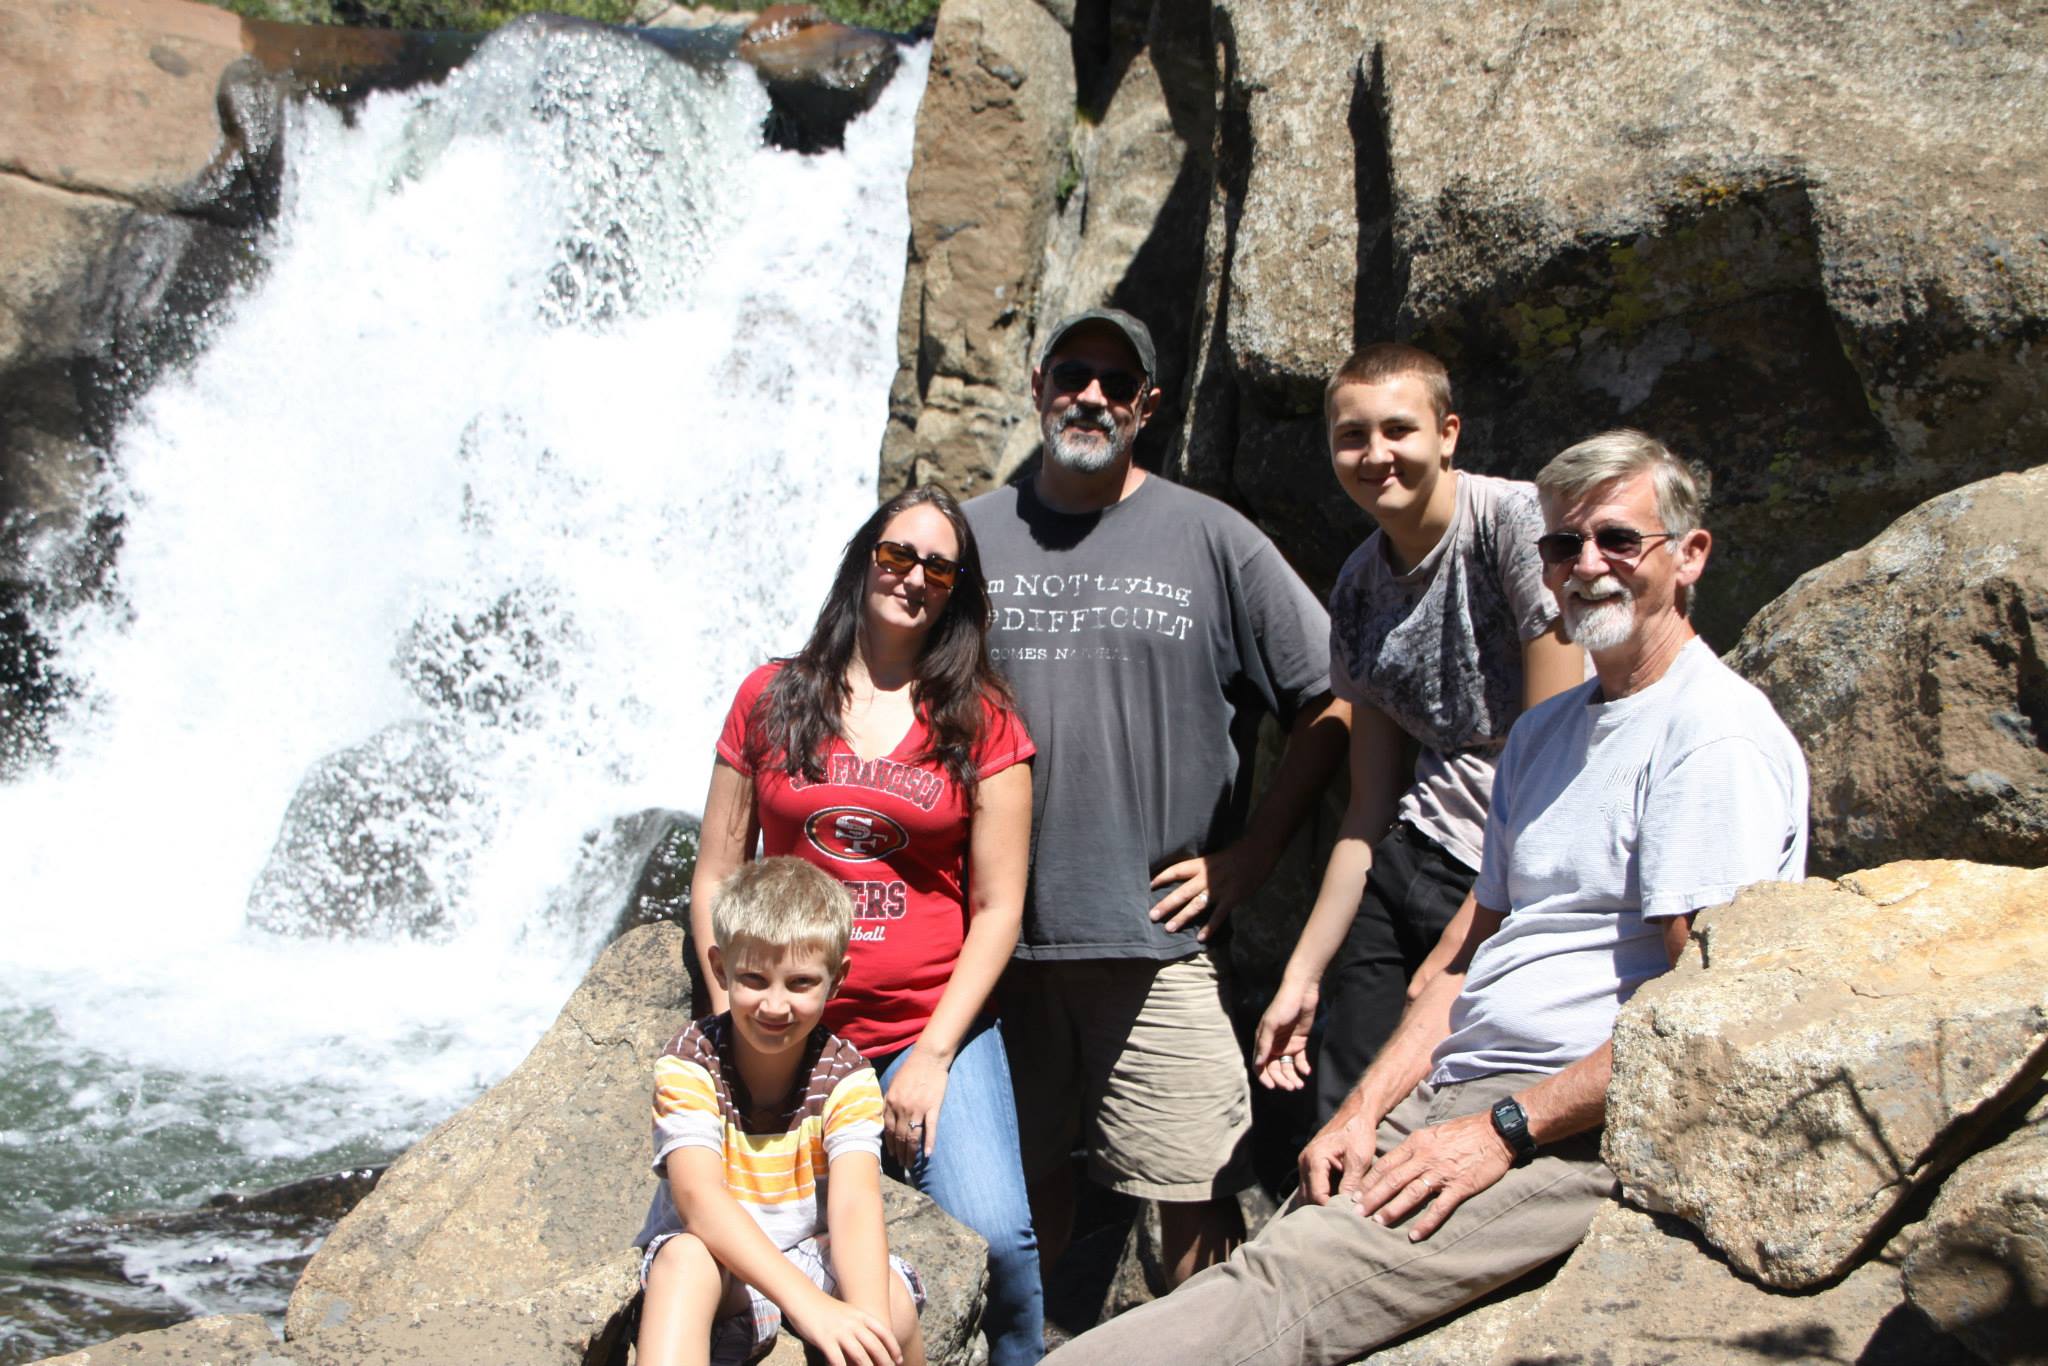 Group of people of different ages posing in front of a waterfall